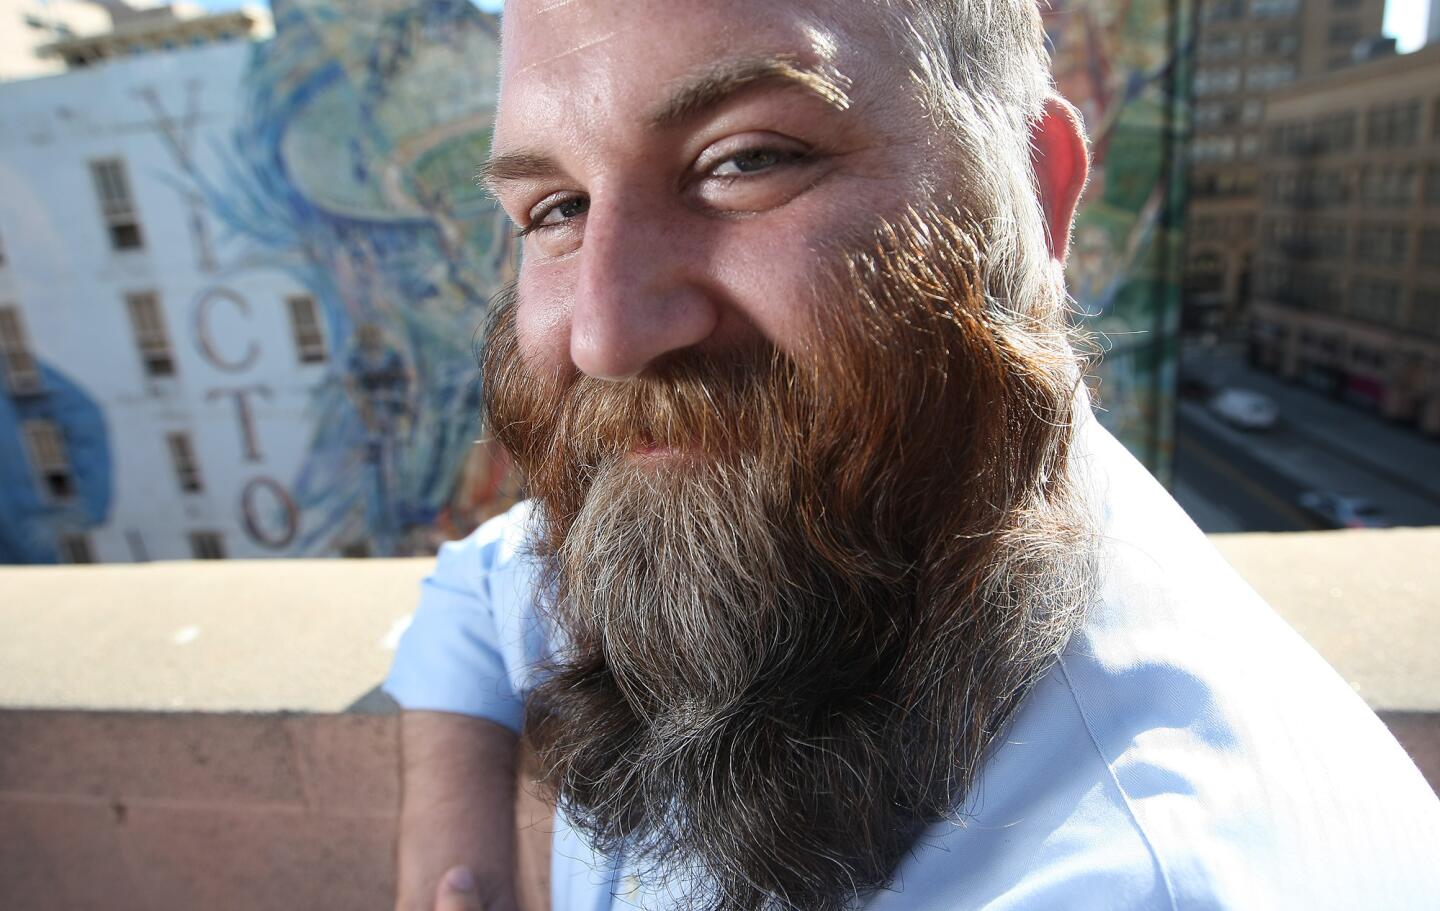 Burbank Leader reporter Chad Garland and his beard. Photographed on Thursday, August 28, 2015.